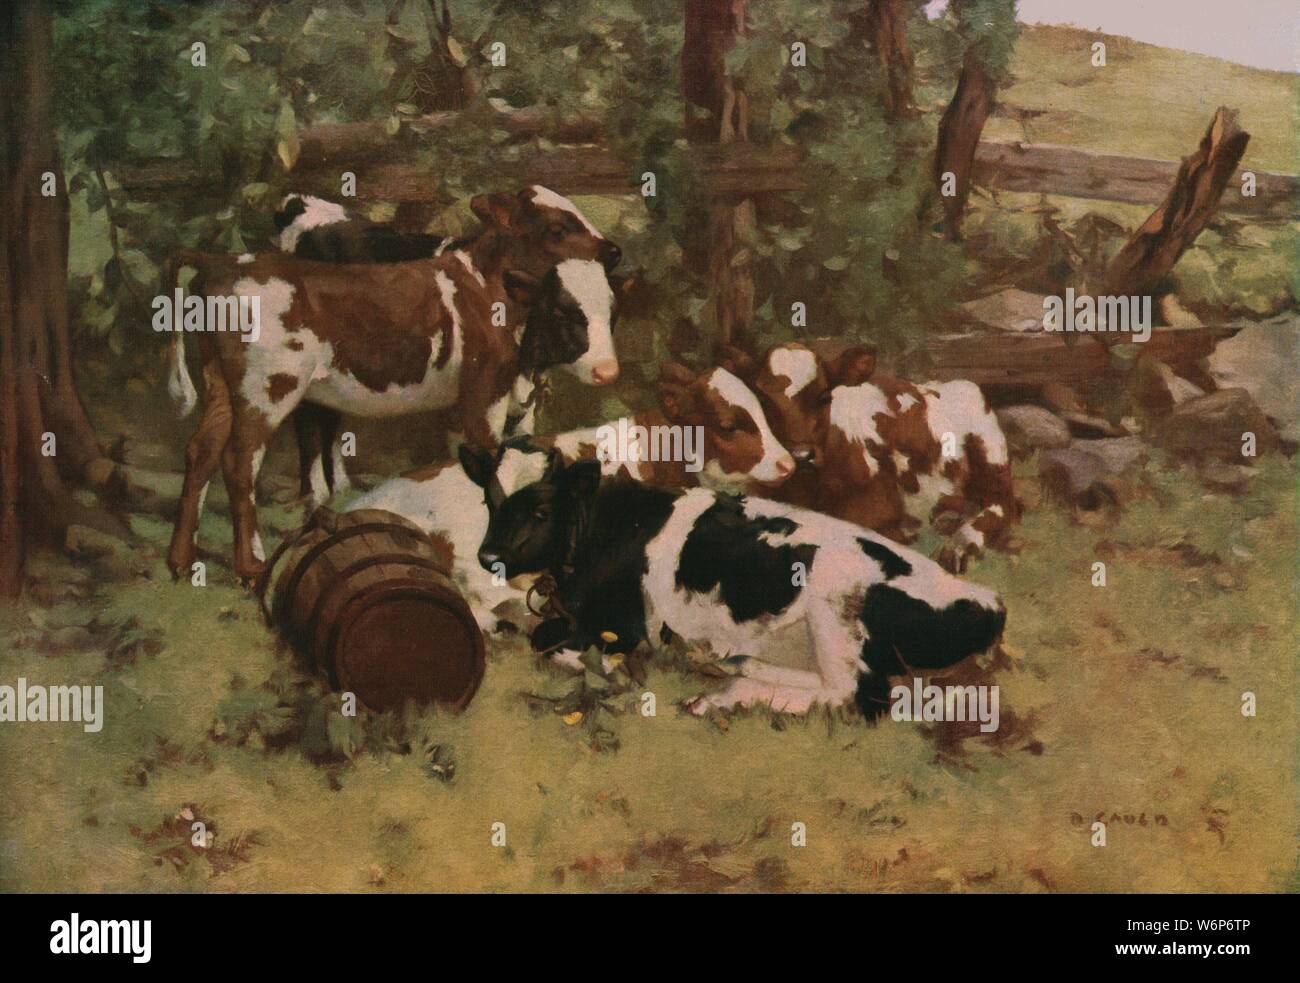 'Contentment', c1903, (c1930). Ayrshire cattle resting in the shade. Painting in the Glasgow Museums Service collection, Glasgow, Scotland. From &quot;Modern Masterpieces of British Art&quot;. [The Amalgamated Press Ltd., London, c1930] Stock Photo